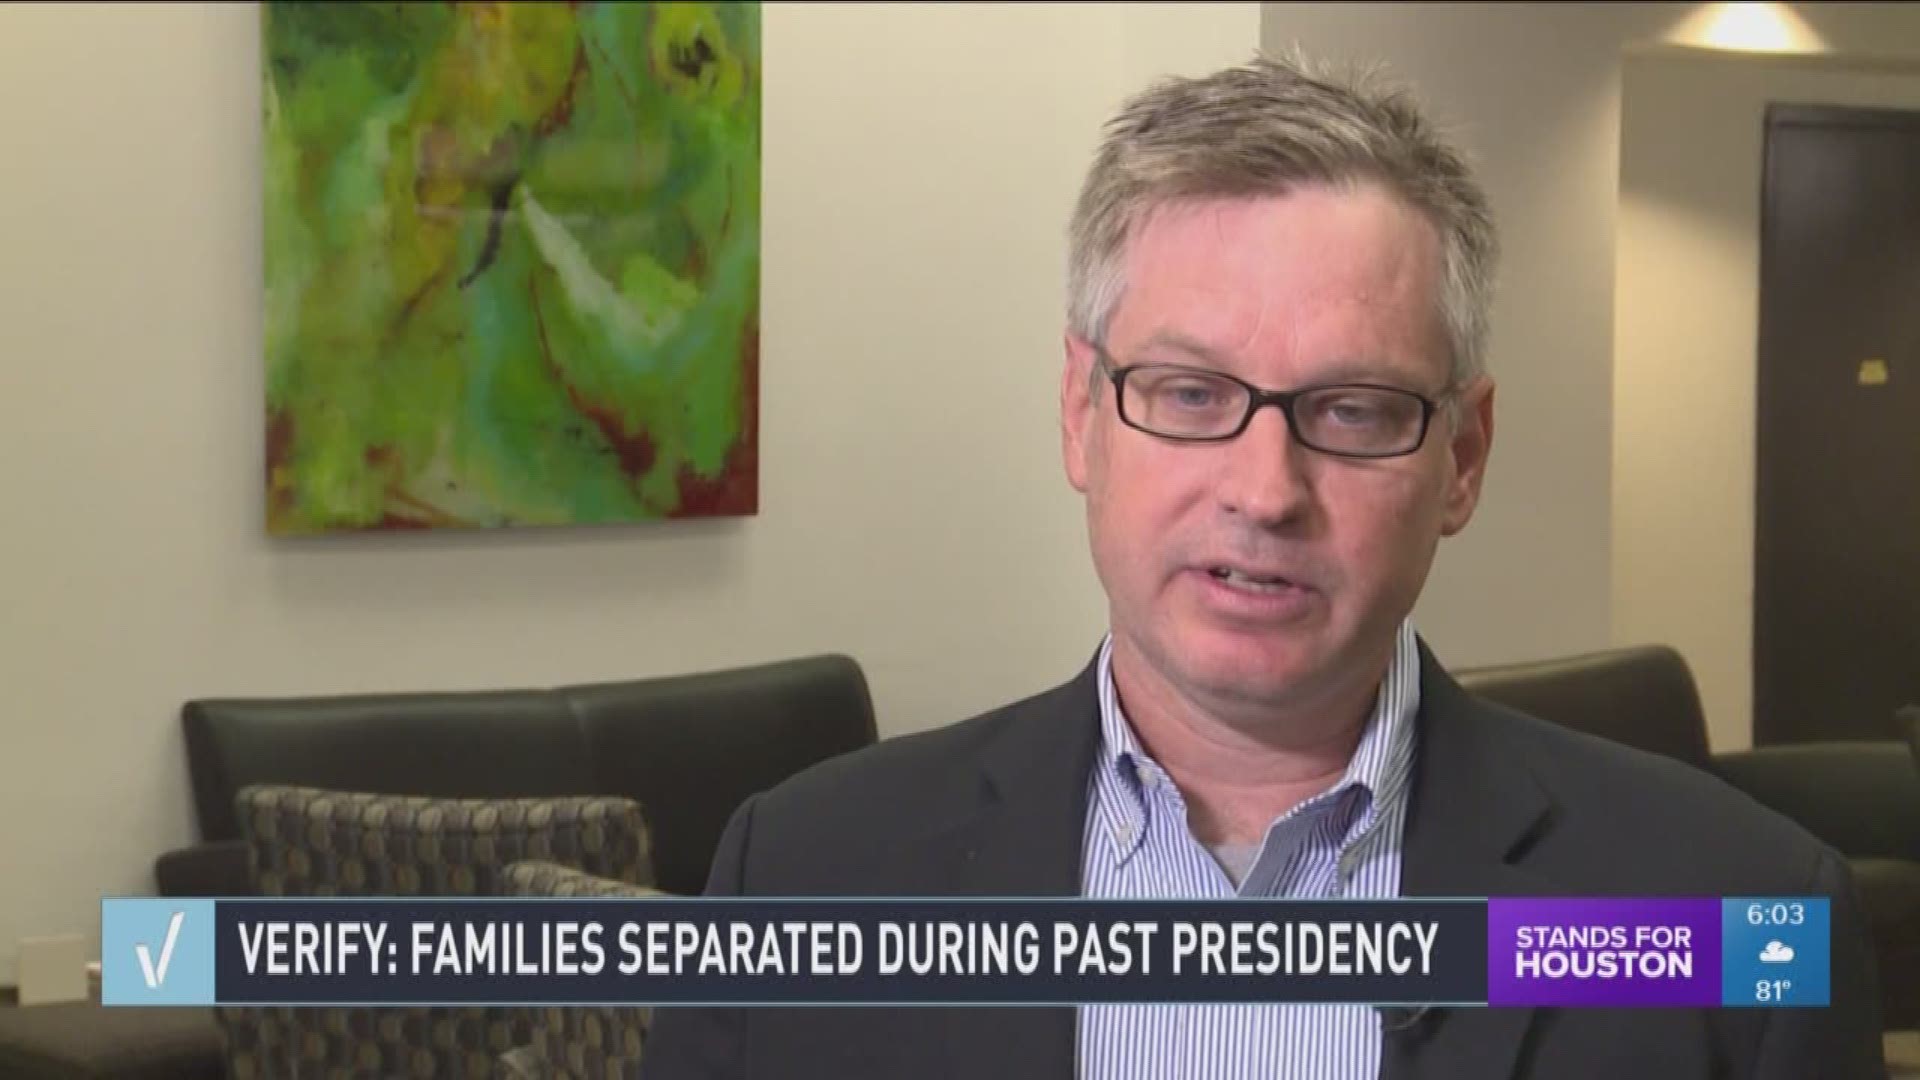 A KHOU 11 News viewer asked our Verify team to look into whether just as many families were separated during the Barack Obama presidency as they are in the Donald Trump presidency.